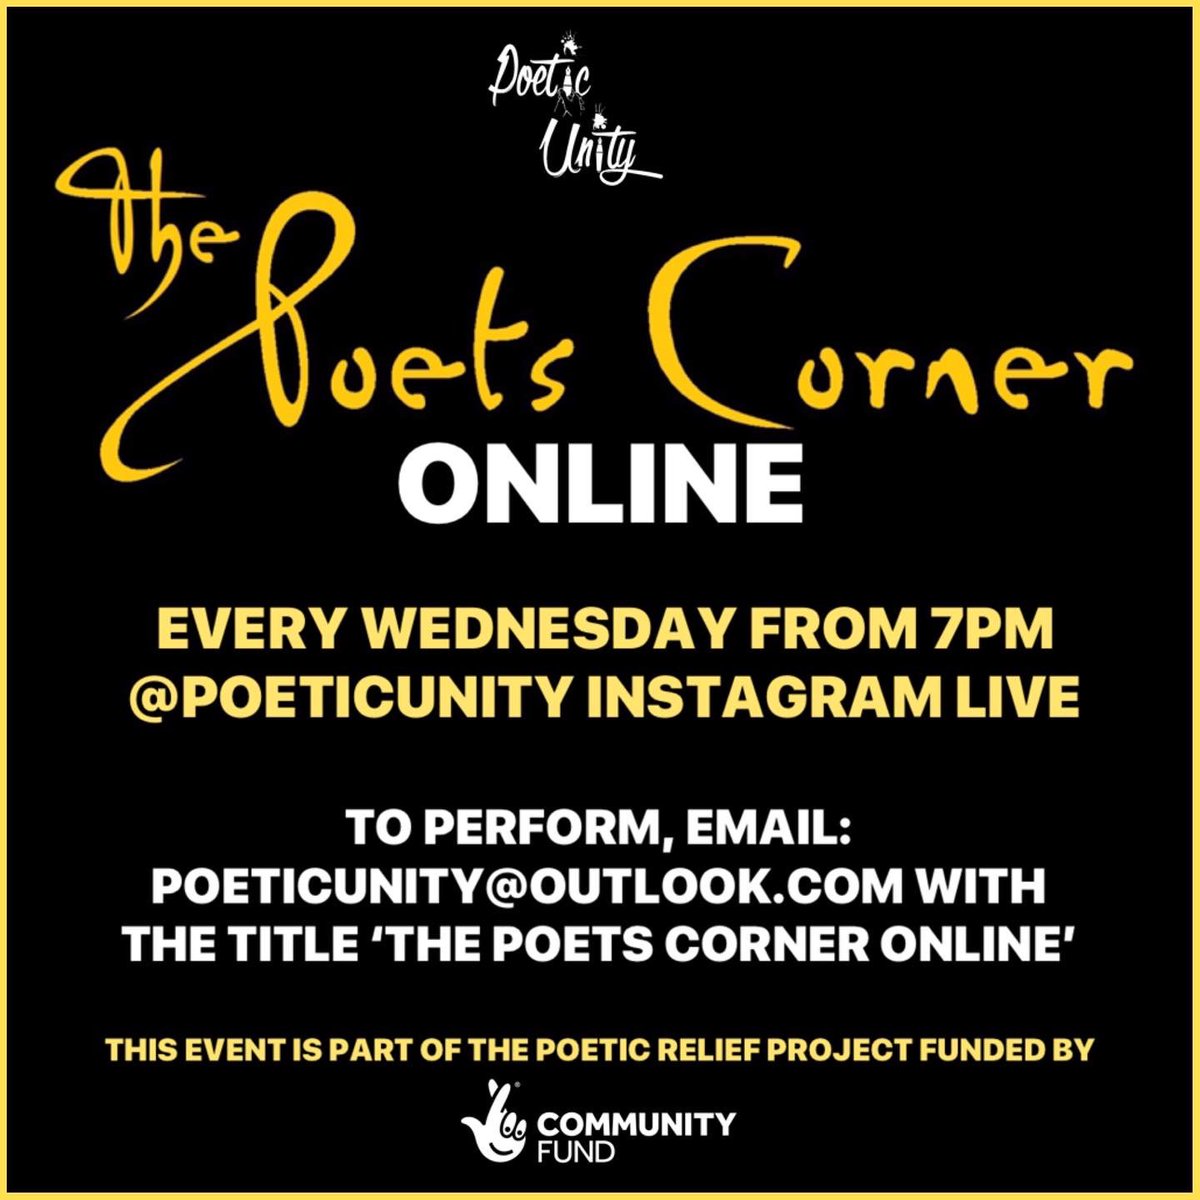 TONIGHT! South London’s ONLY weekly poetry event ‘The Poets Corner’ ONLINE! Lock in to our Instagram Live from 7pm to hear some of the worlds best poets! Follow us on Instagram: PoeticUnity to lock in later #ThePoetsCornerOnline